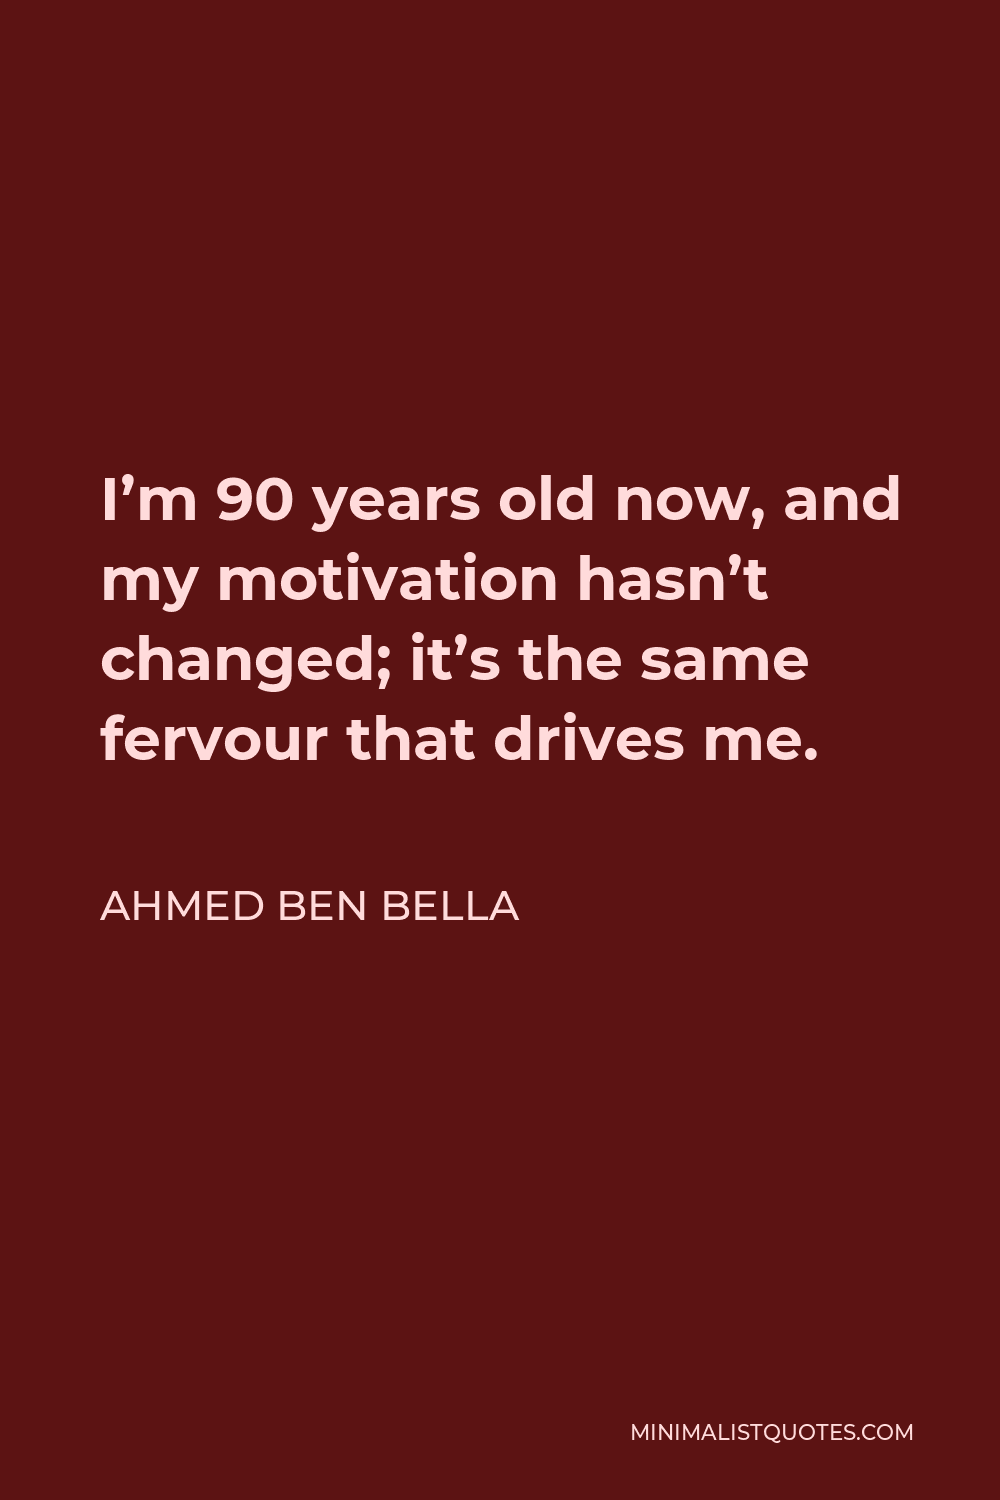 Ahmed Ben Bella Quote - I’m 90 years old now, and my motivation hasn’t changed; it’s the same fervour that drives me.